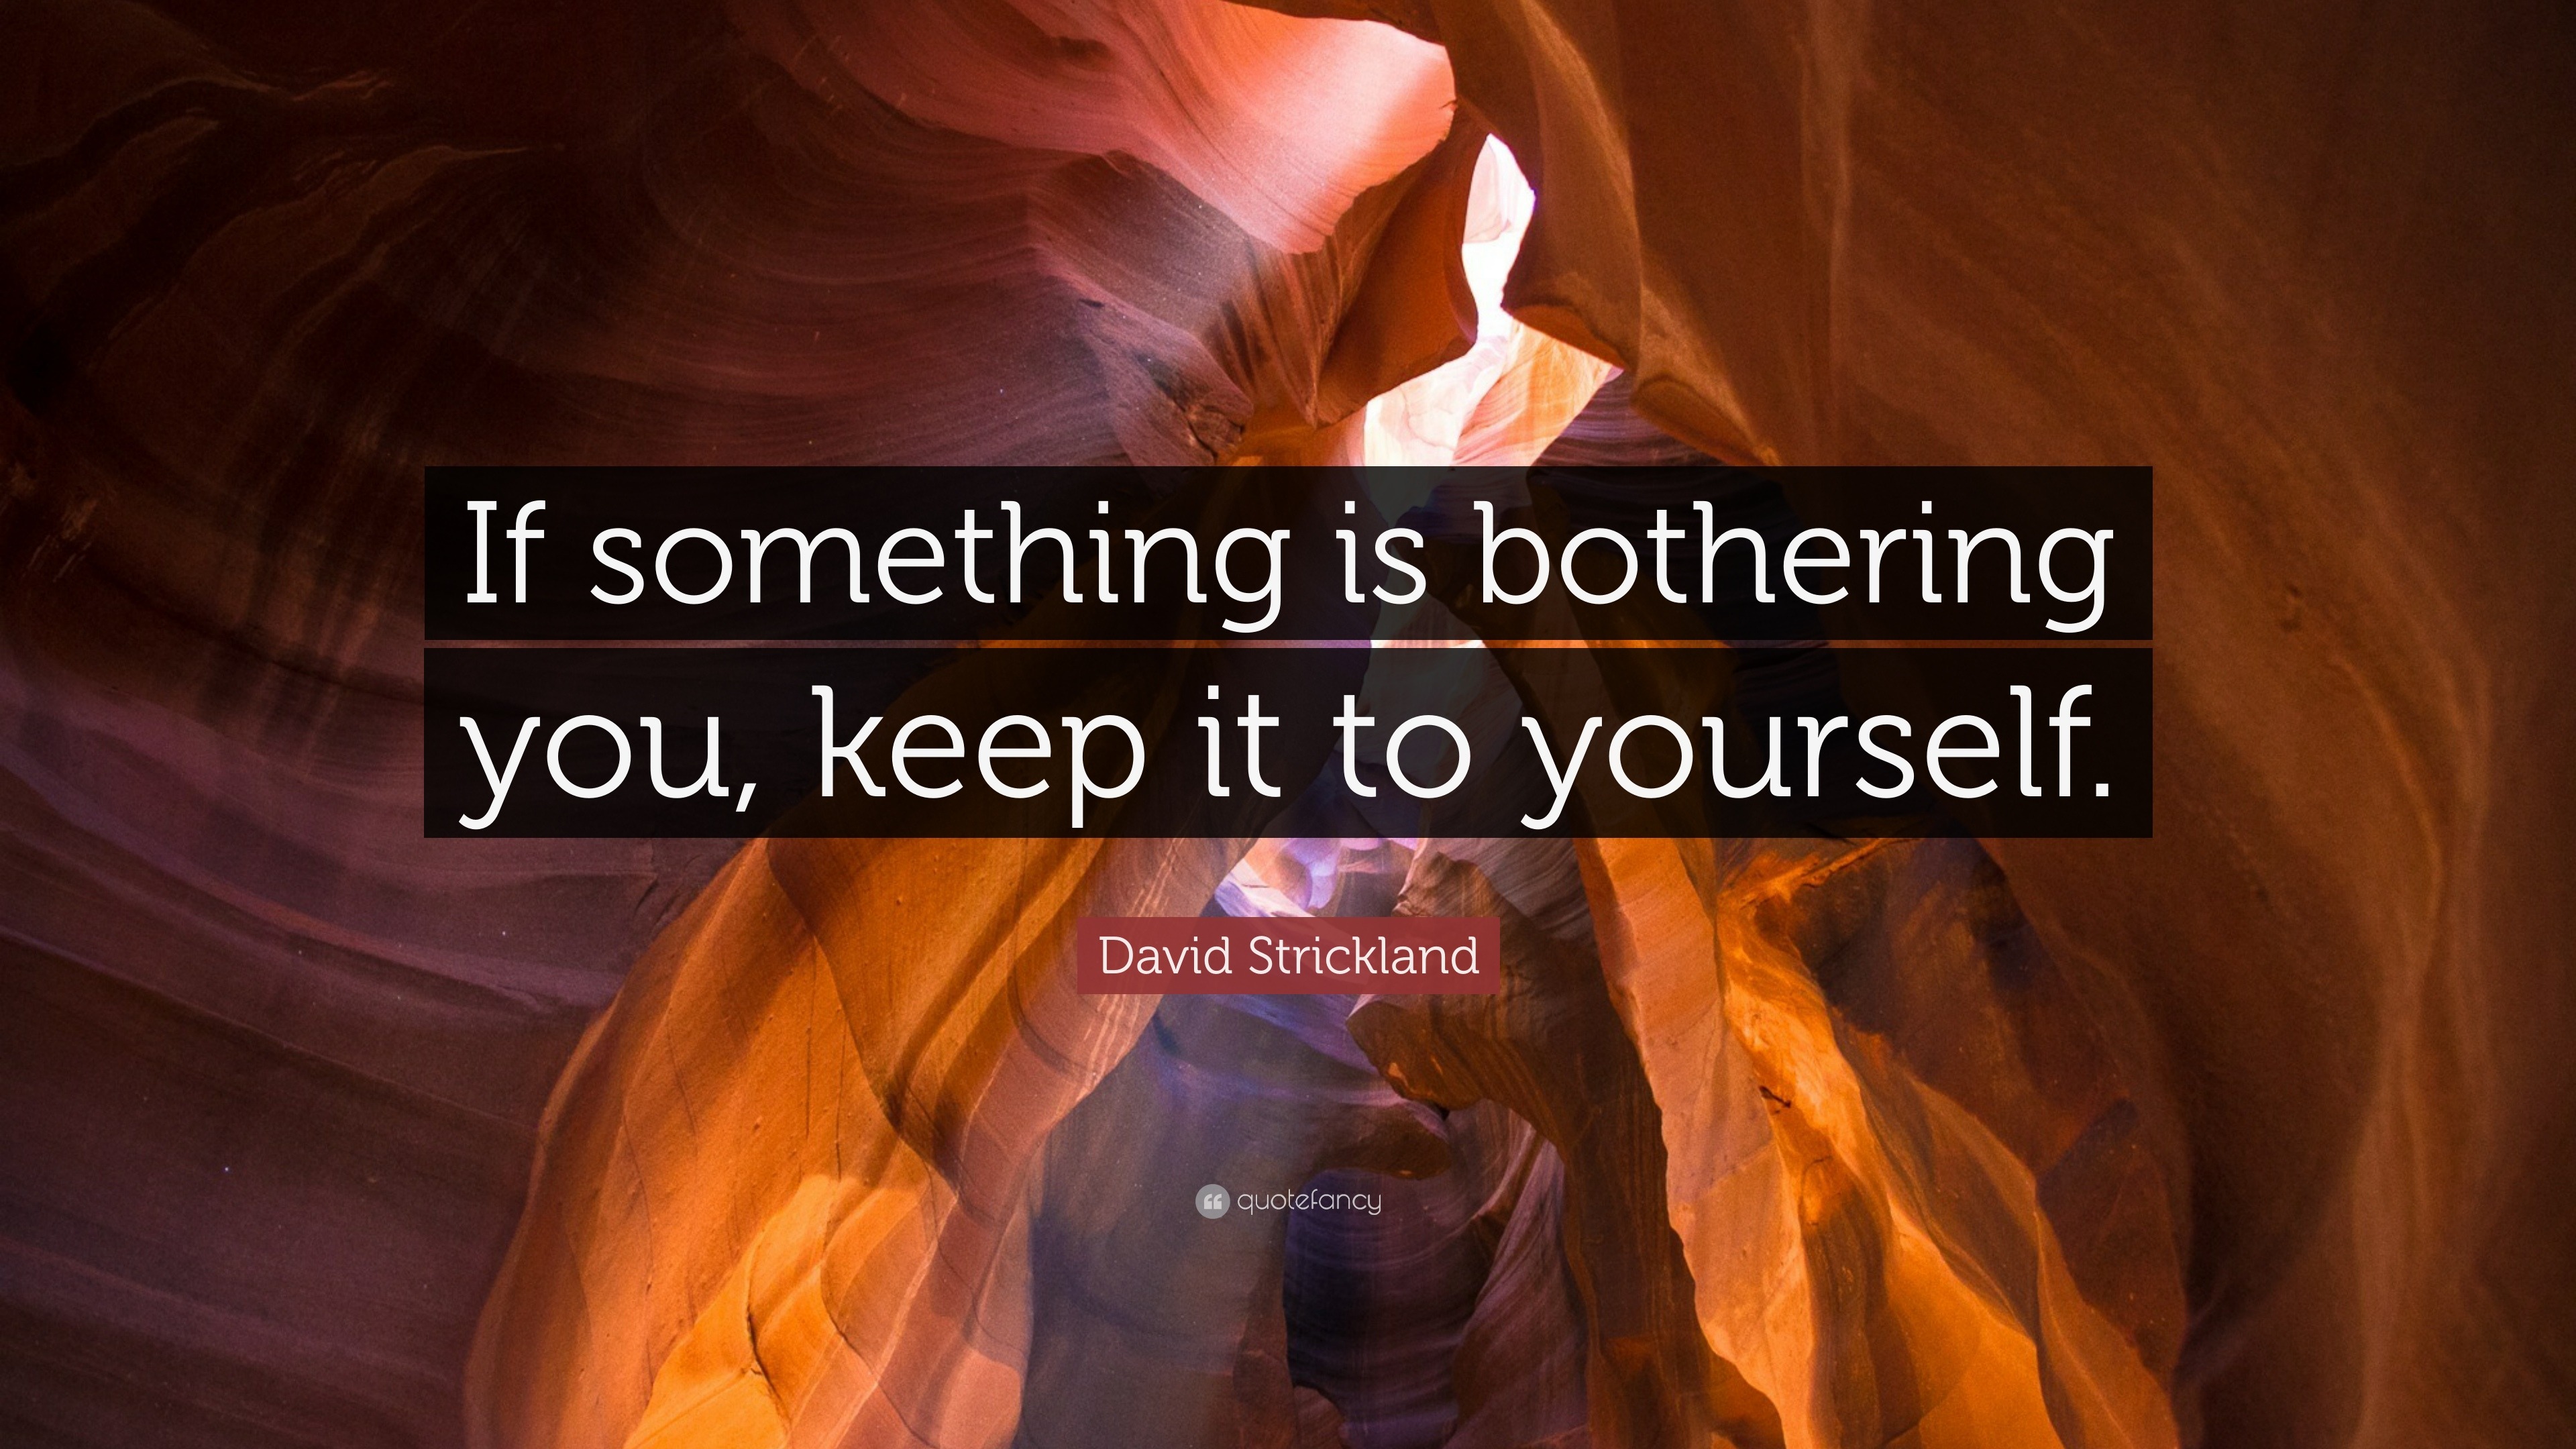 David Strickland Quote “If something is bothering you, keep it to